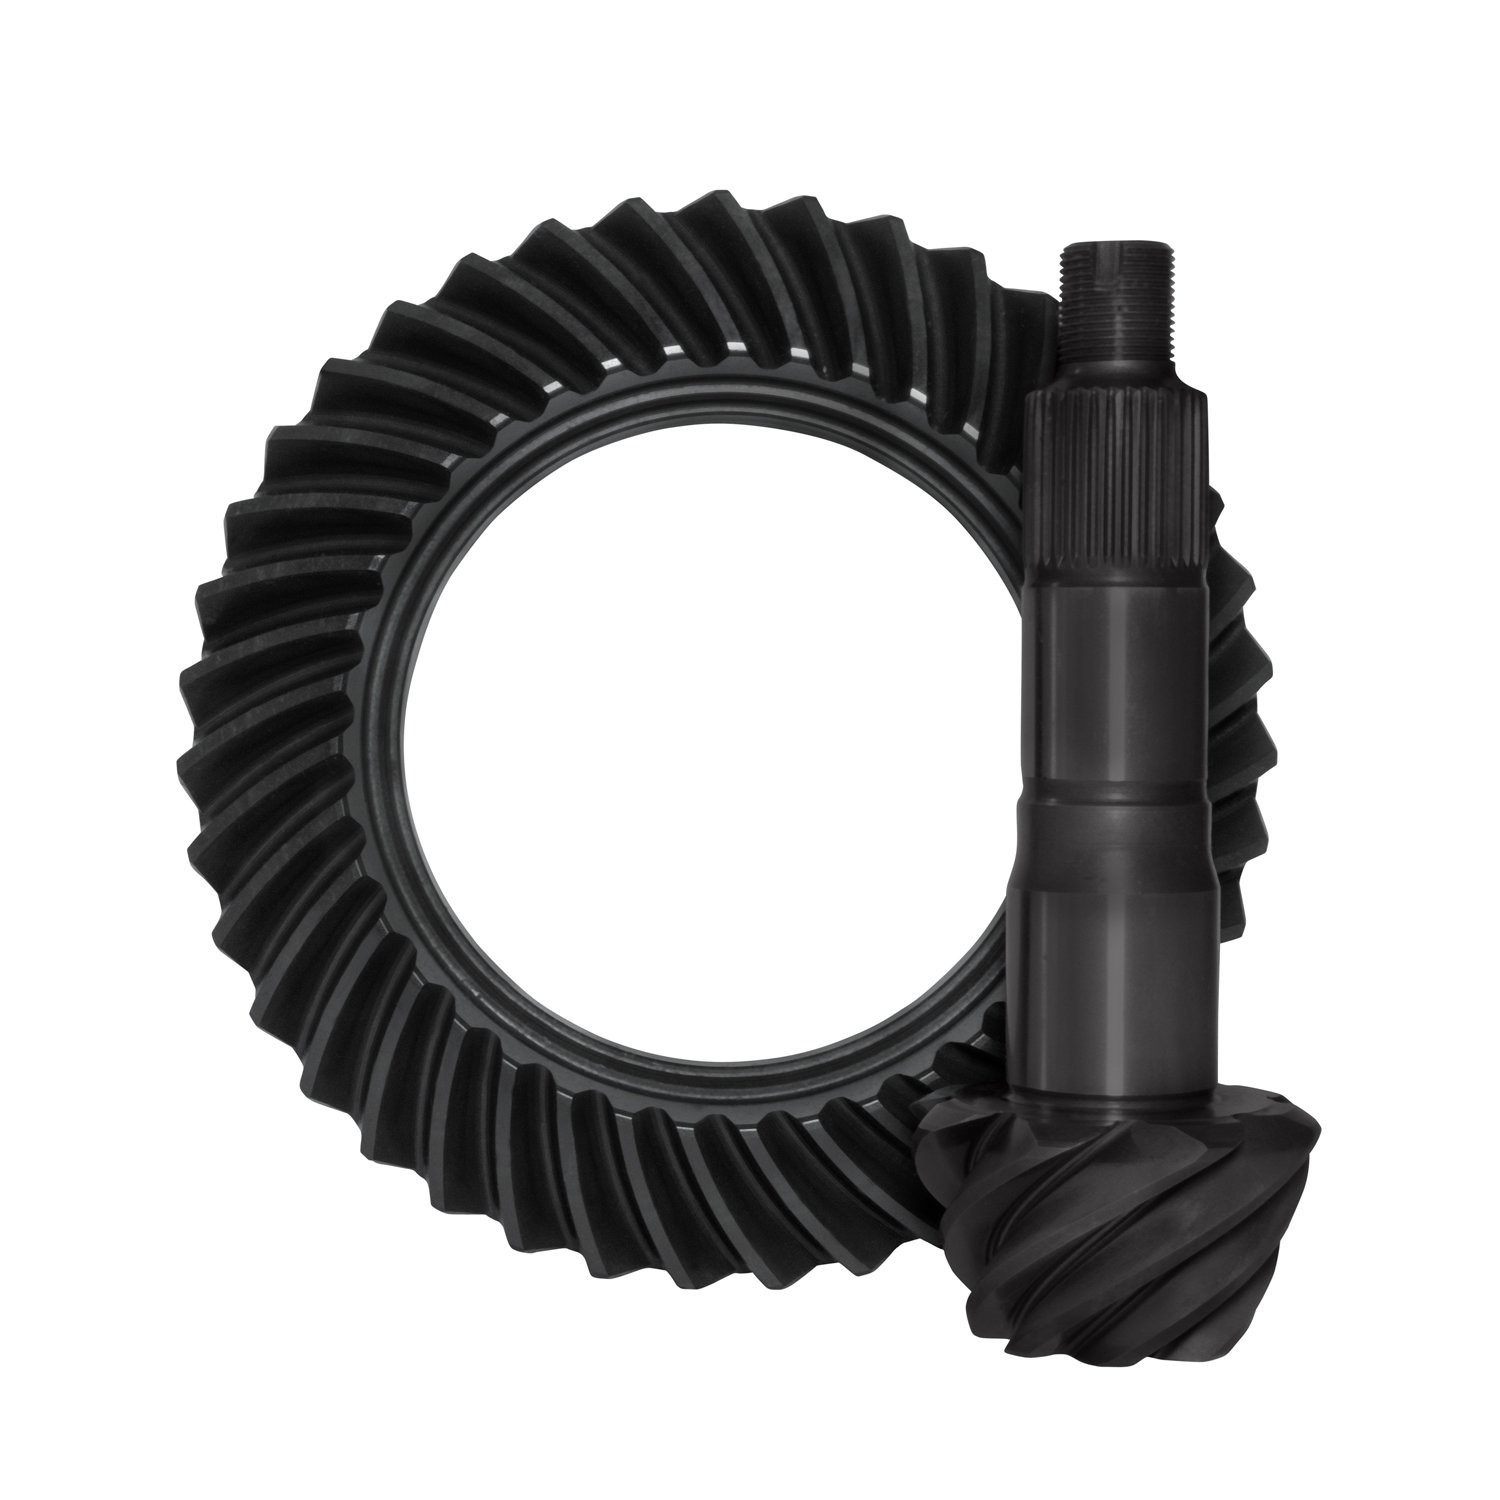 USA Standard 36438 Ring & Pinion Gear Set, For Toyota 9 in. Ifs In Reverse 4.88 Ratio